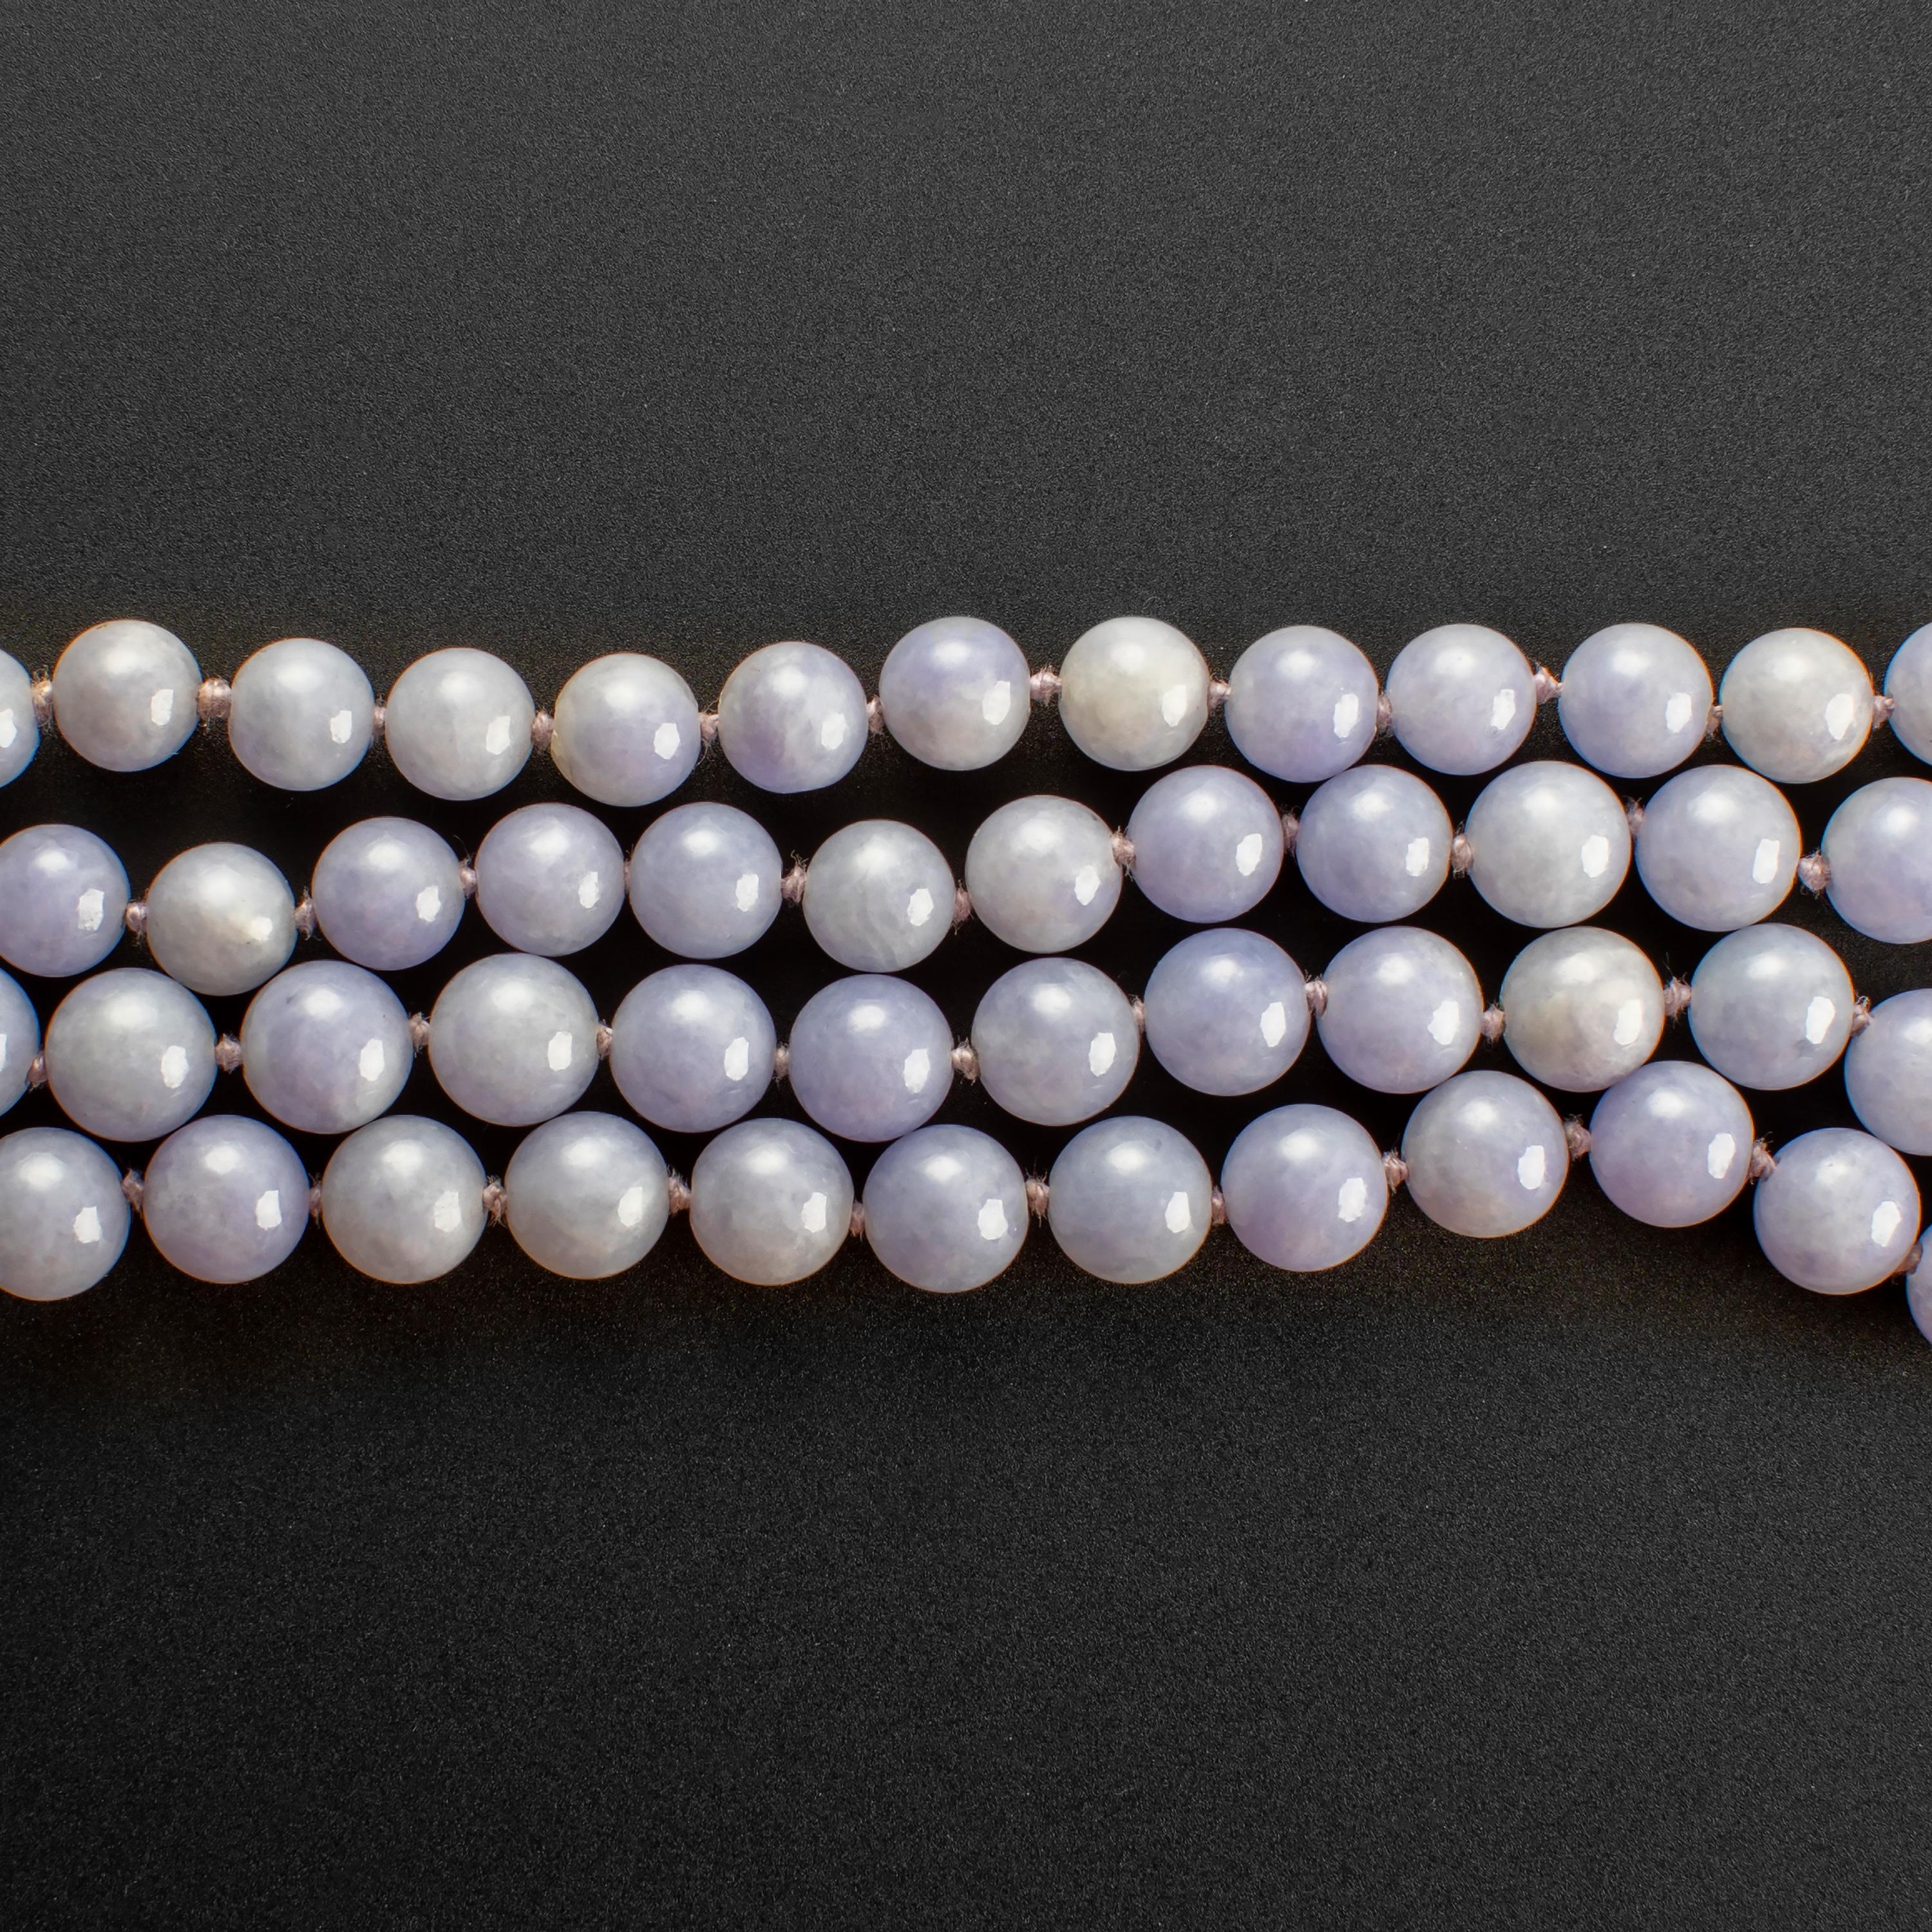 This gorgeous and rare necklace consists of 76 evenly-toned, translucent beads of the most ethereal lavender jade. Measuring 28